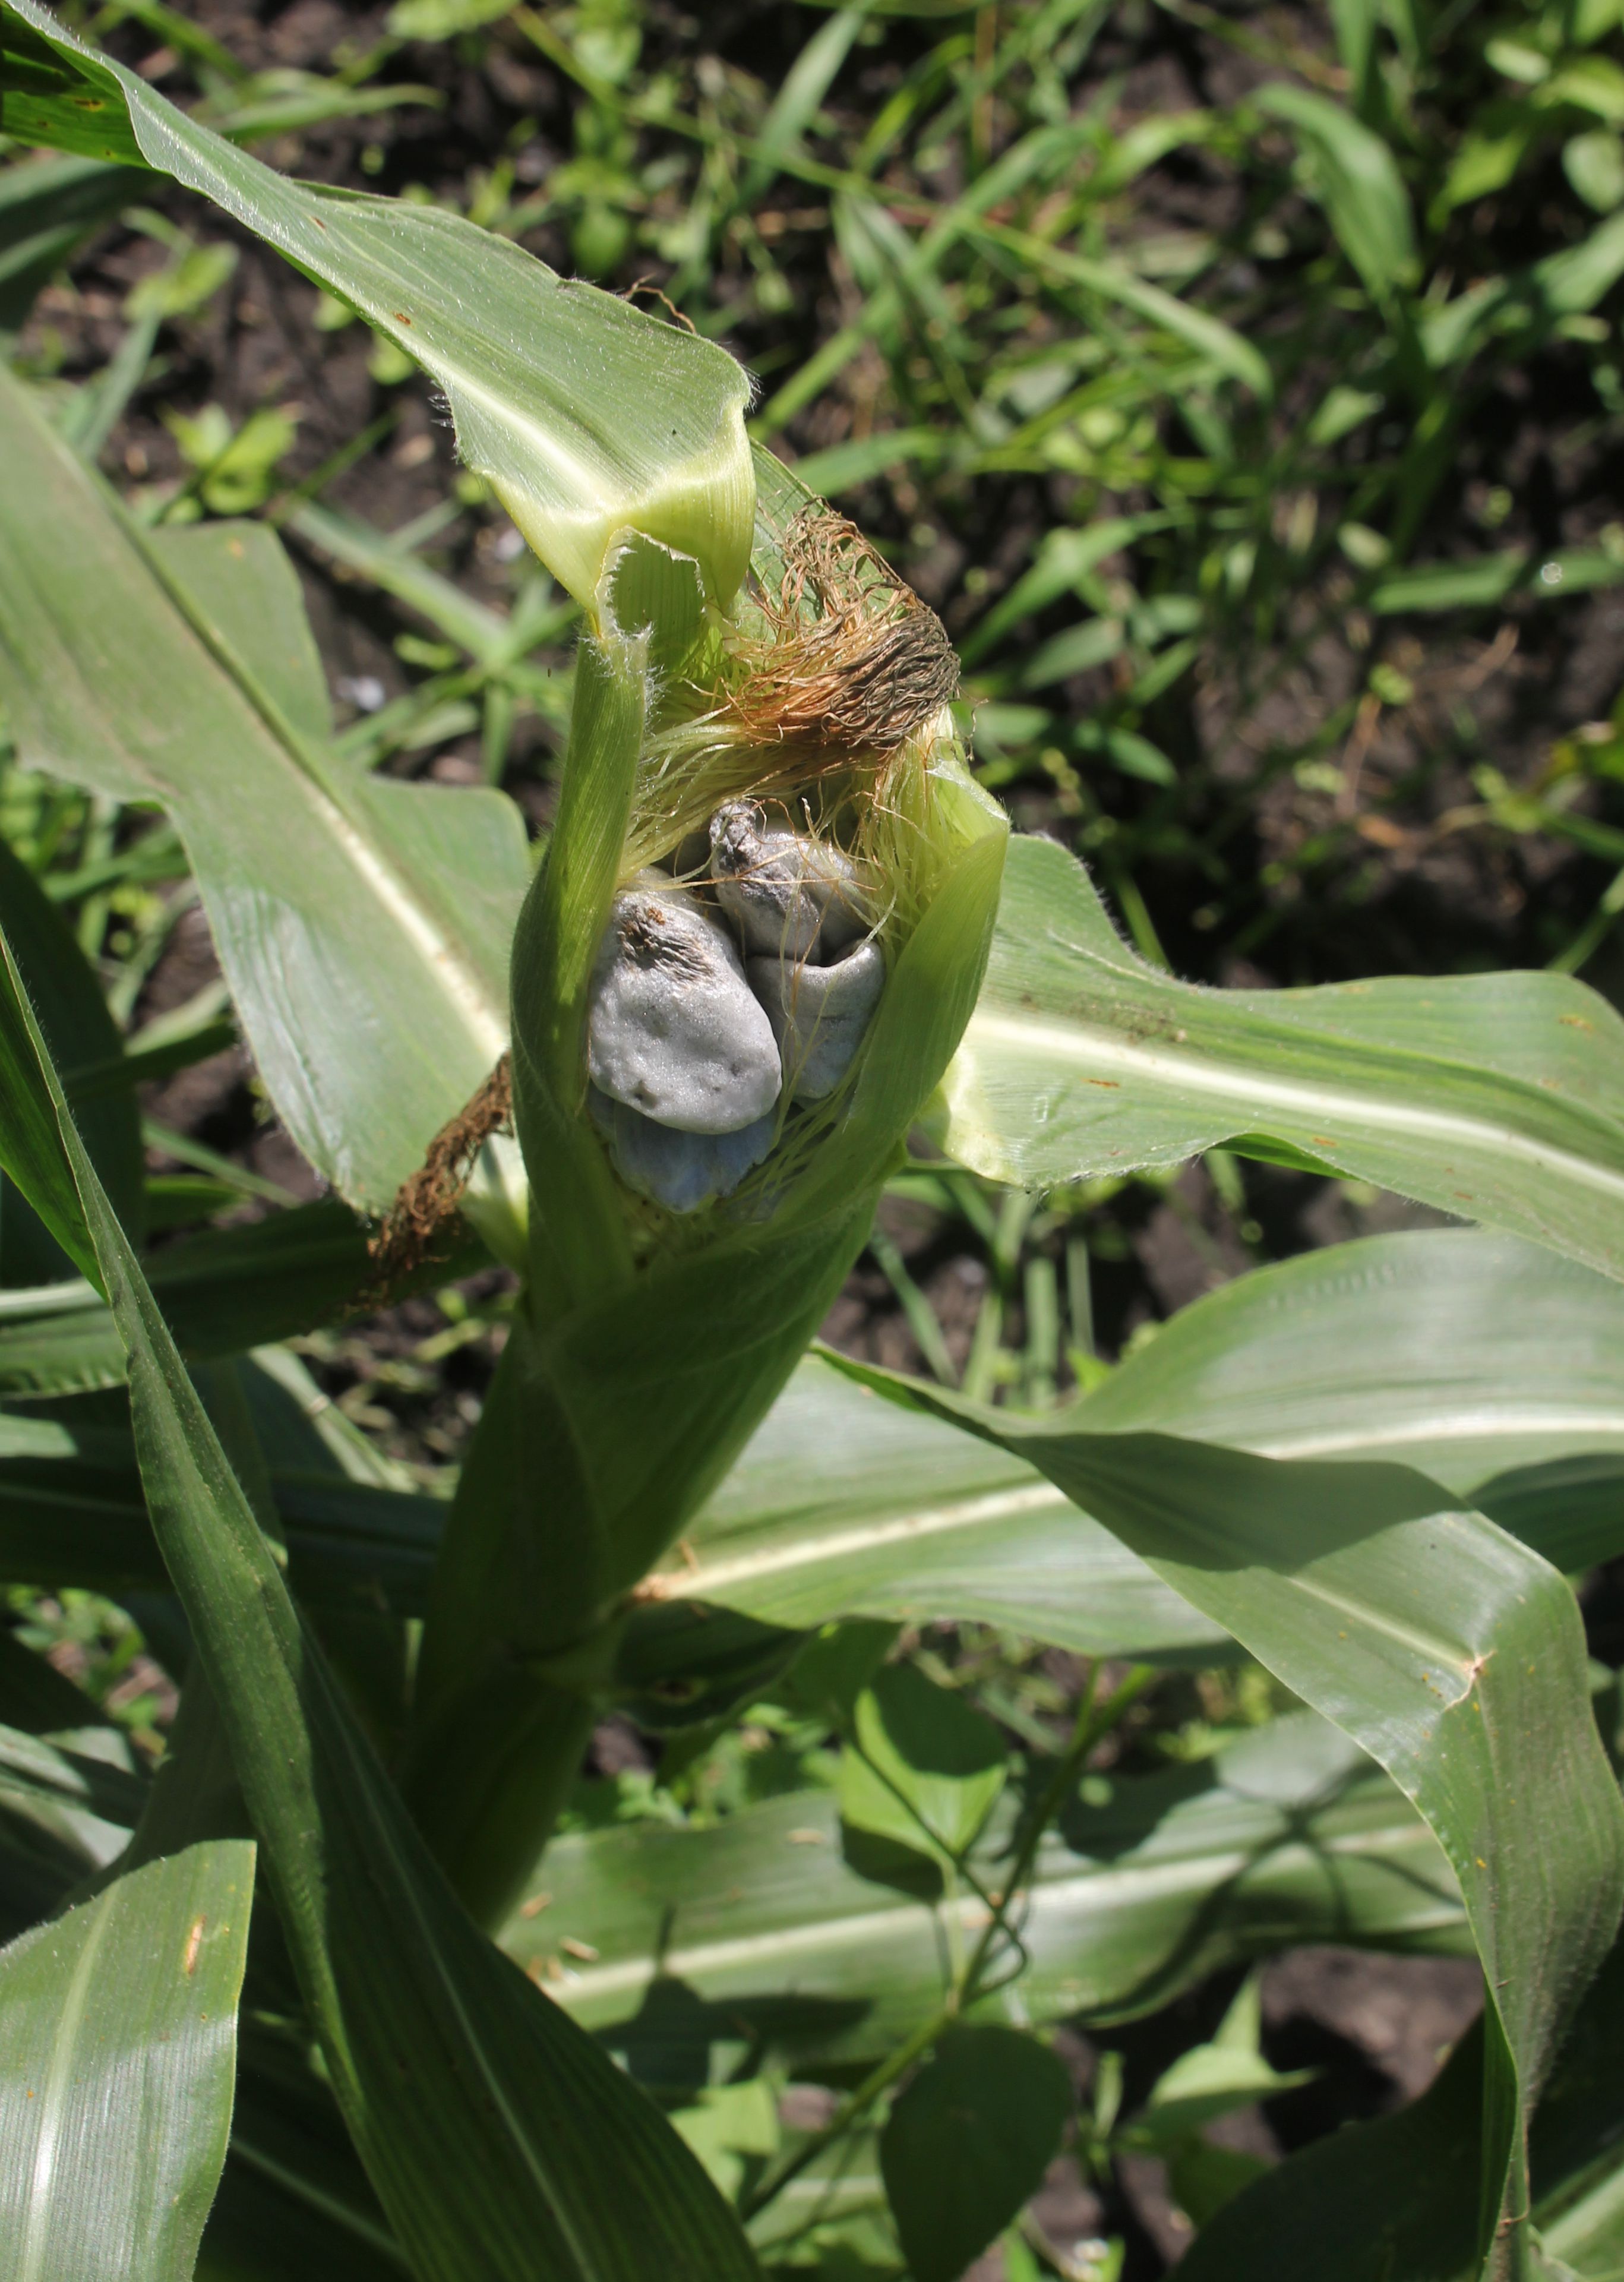 A white and gray, mold-like growth on an ear of sweet corn.